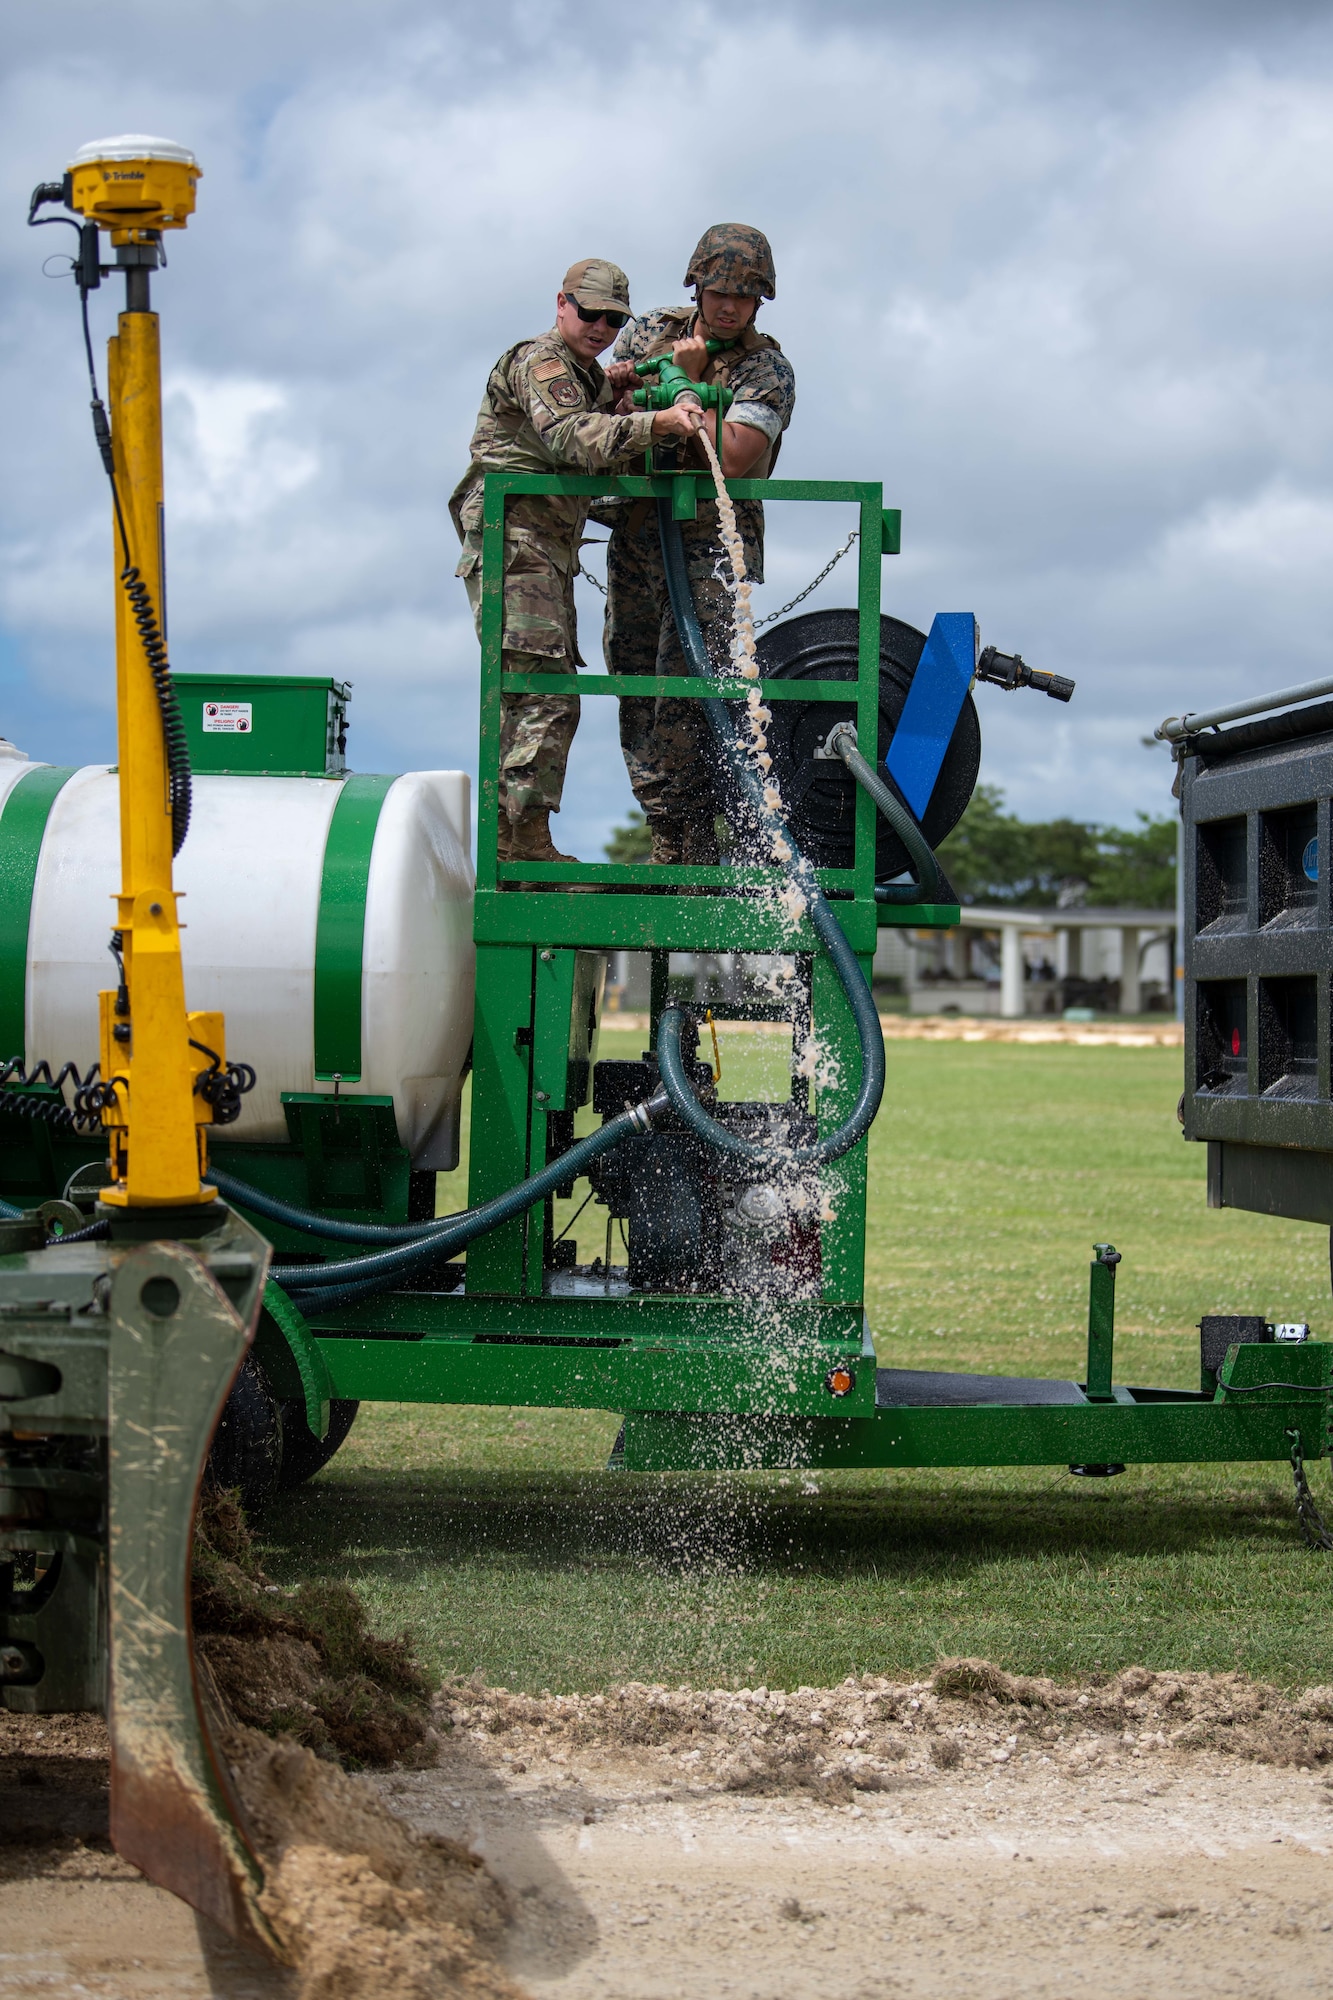 An Airman and a Marine use a water hose.